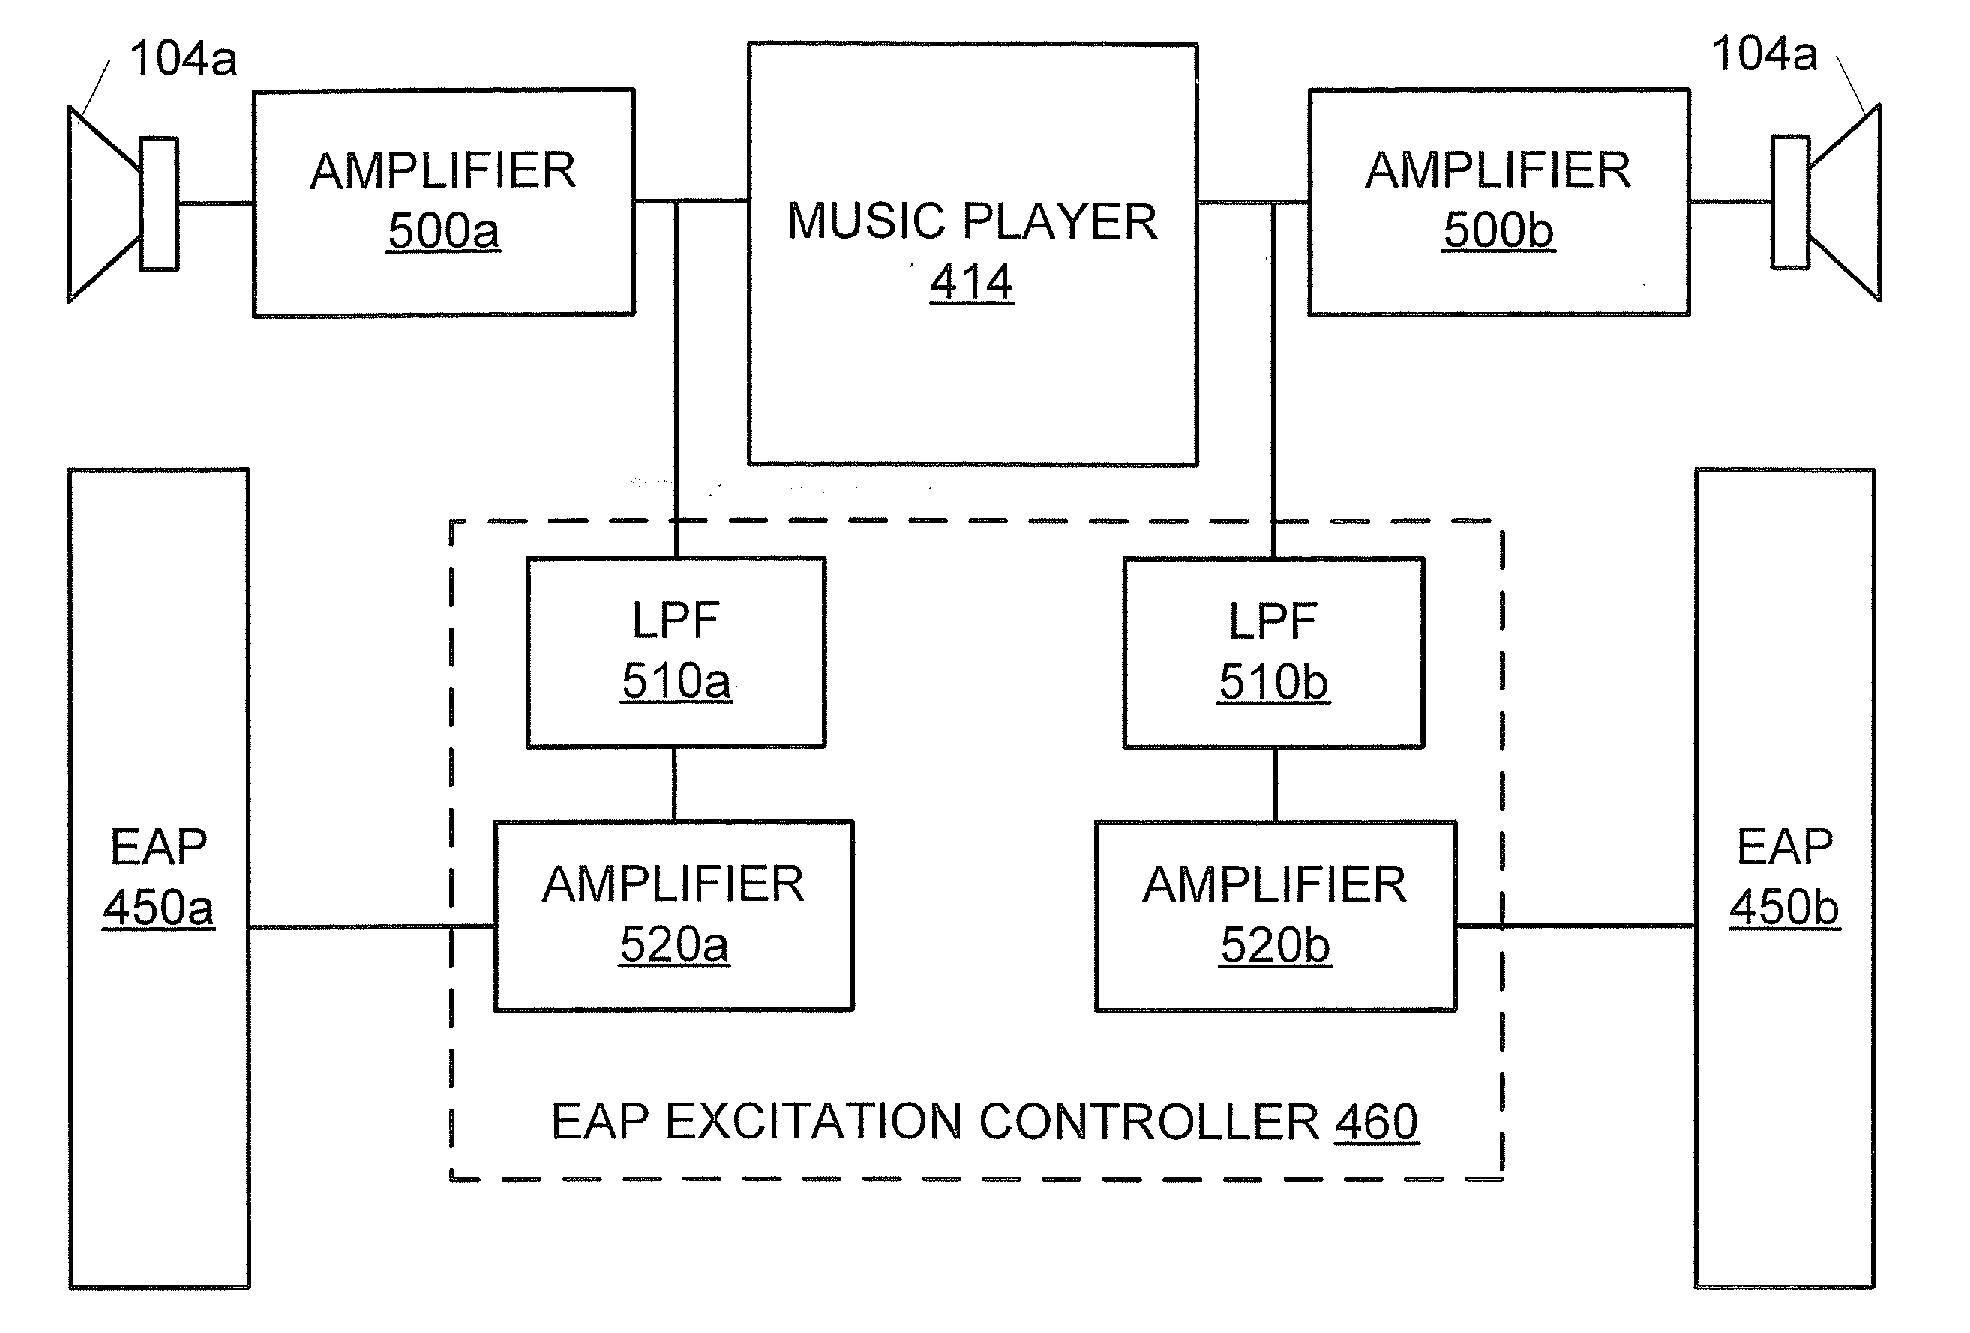 Cellular terminals and other electronic devices and methods using electroactive polymer transducer indicators